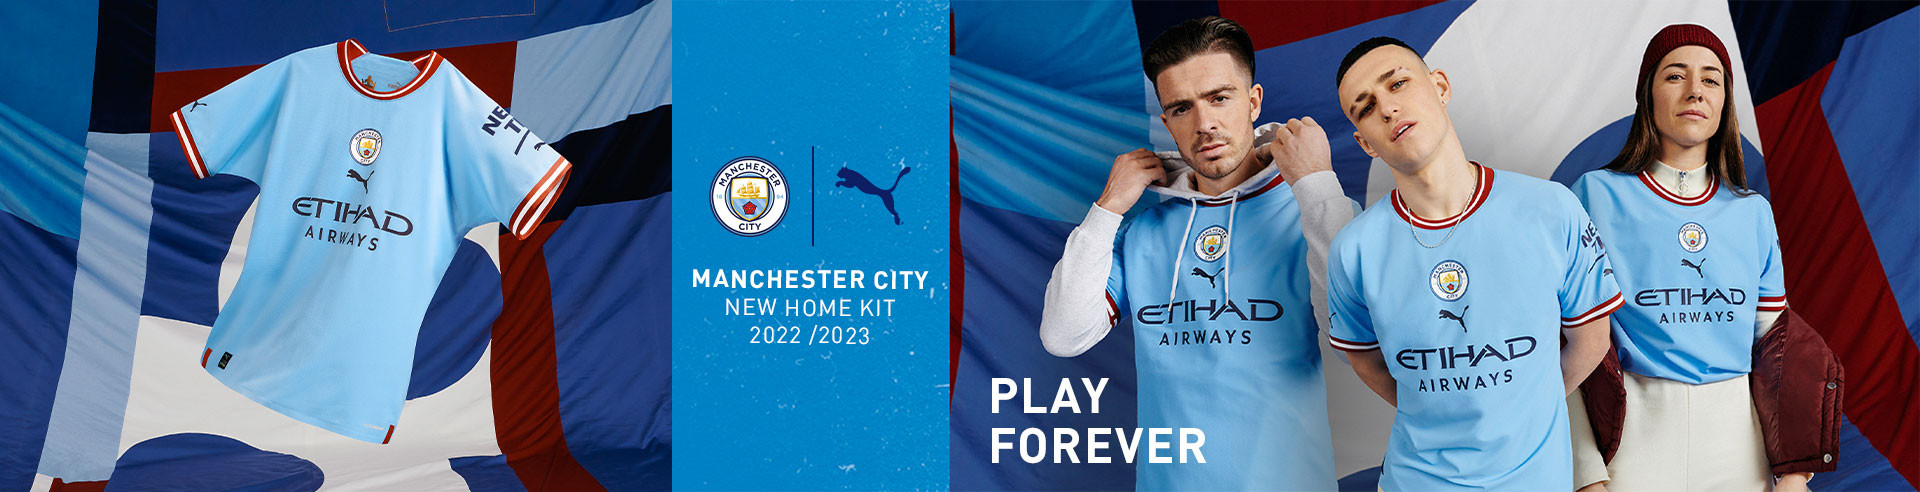 MANCHESTER CITY NEW HOME KIT 2022 2023 MAYO